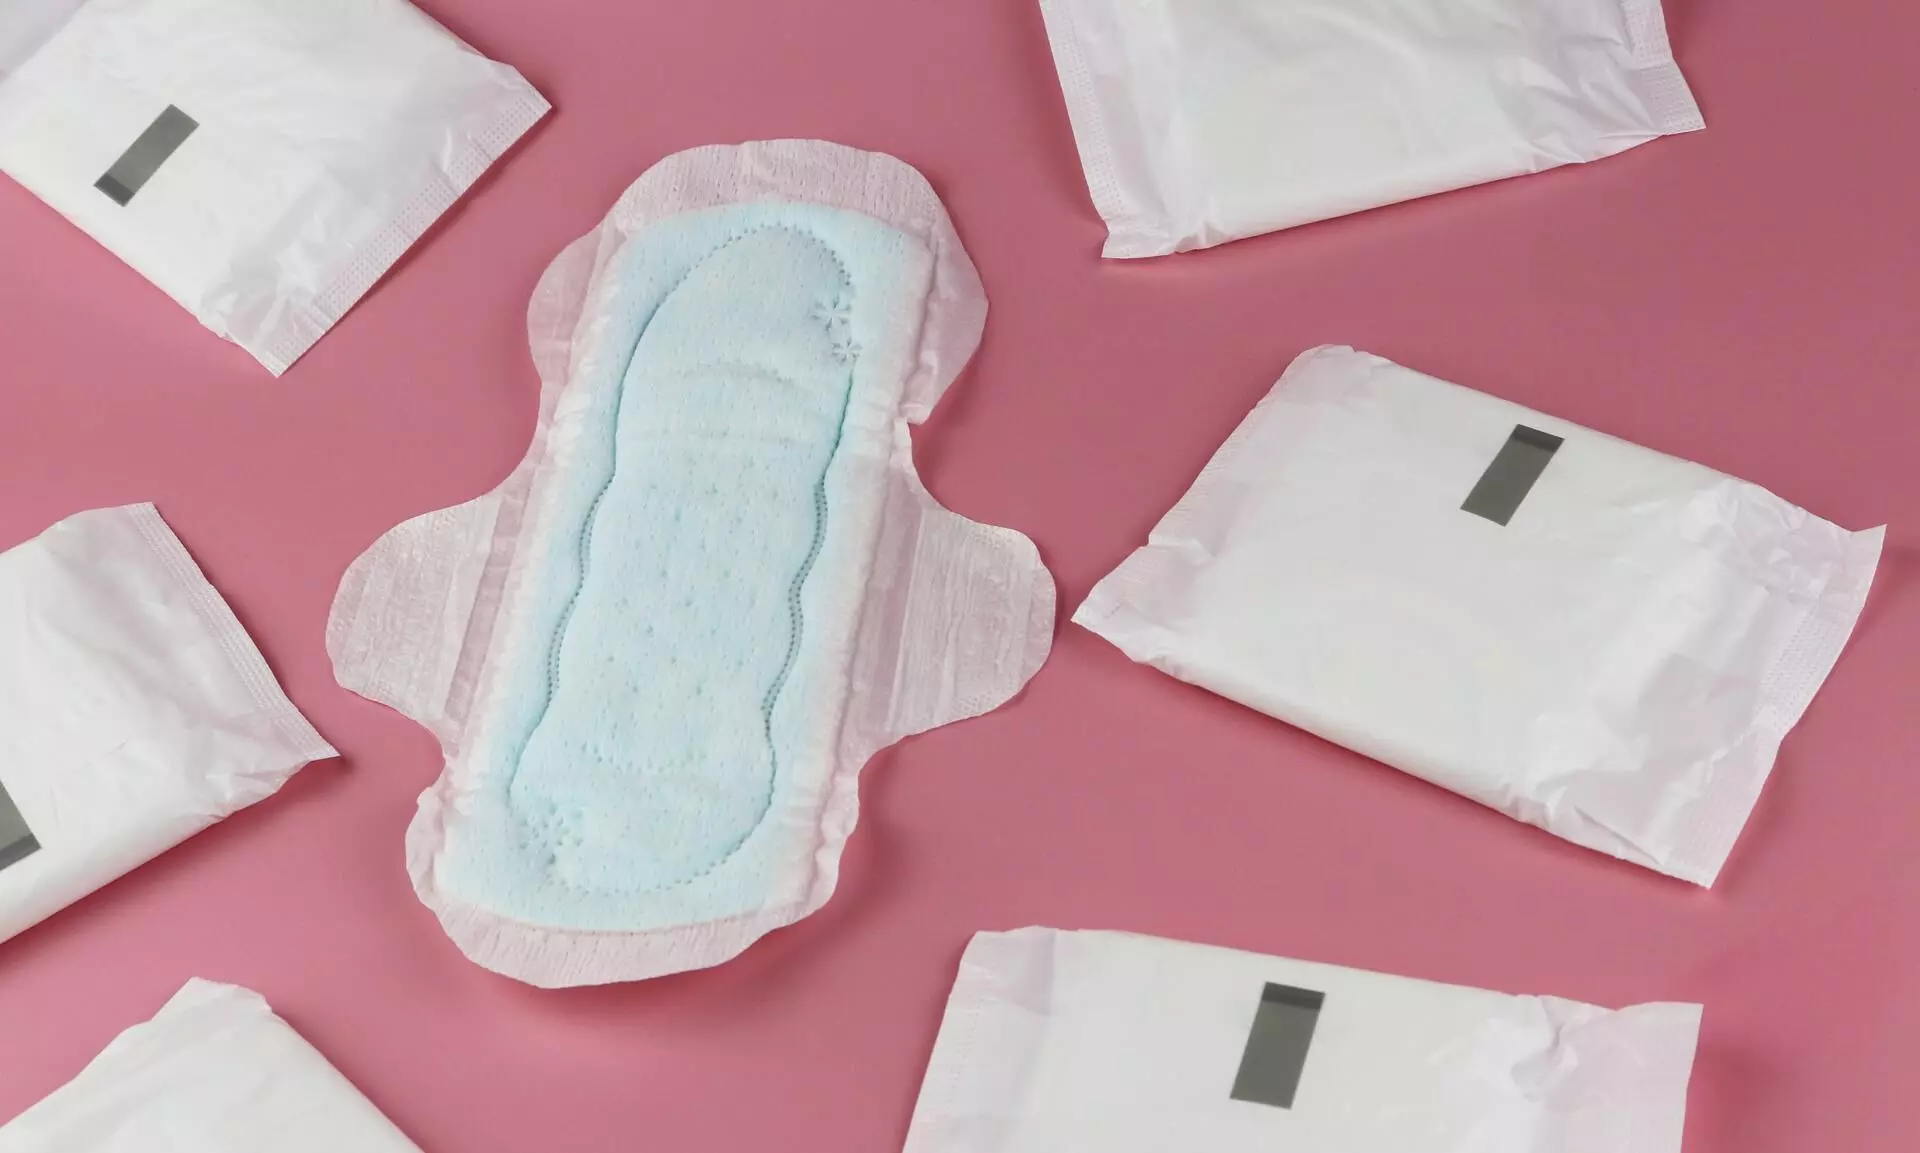 How safe is your sanitary napkin?